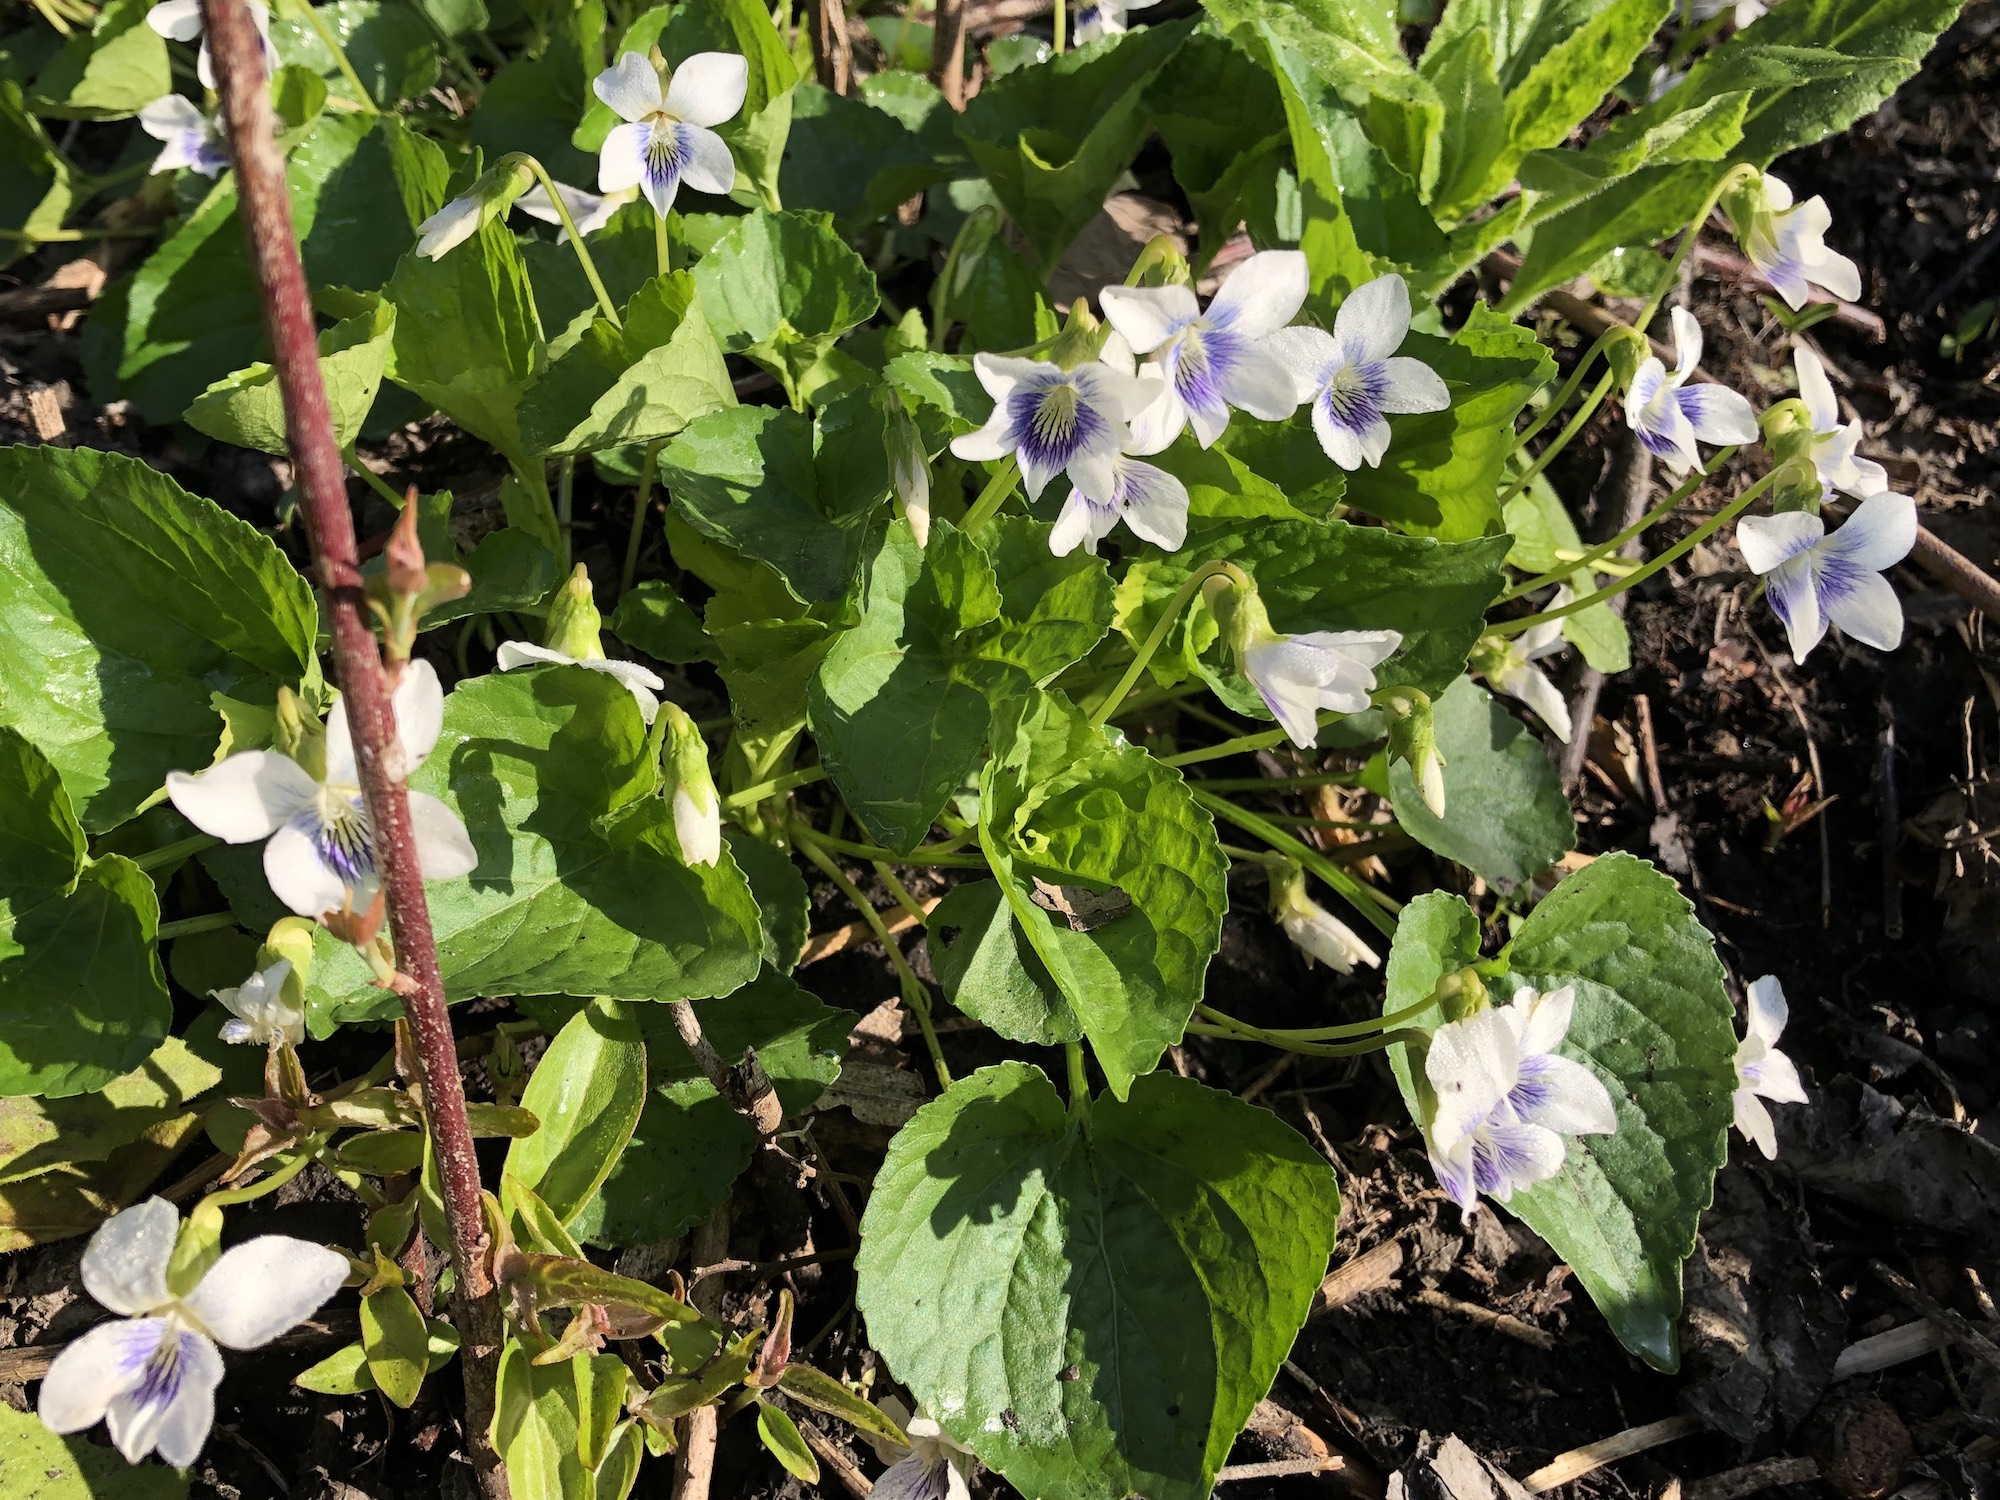 Wood Violets near the Duck Pond on May 4, 2019.